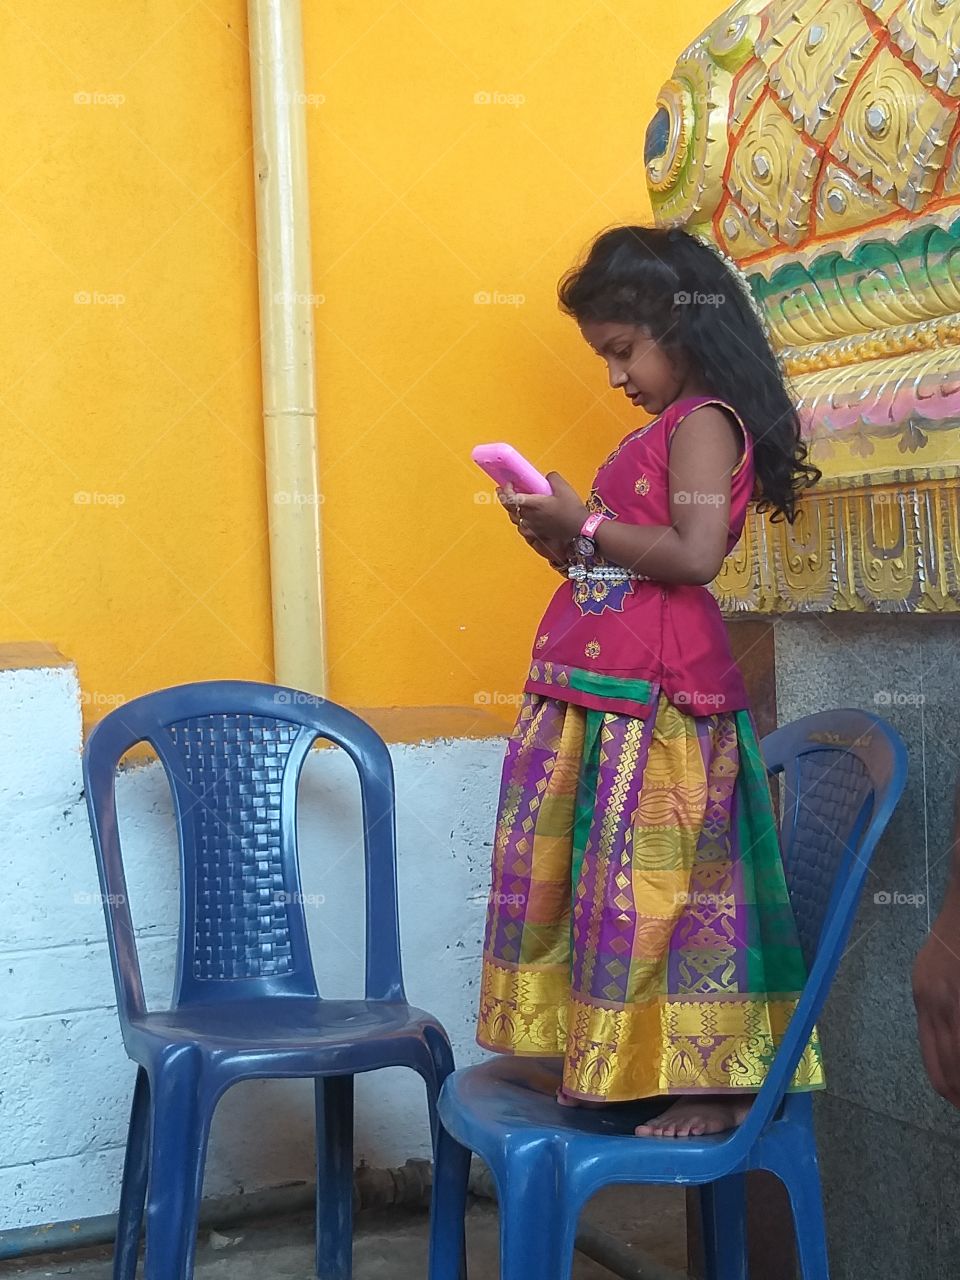 child playing with cellphone.